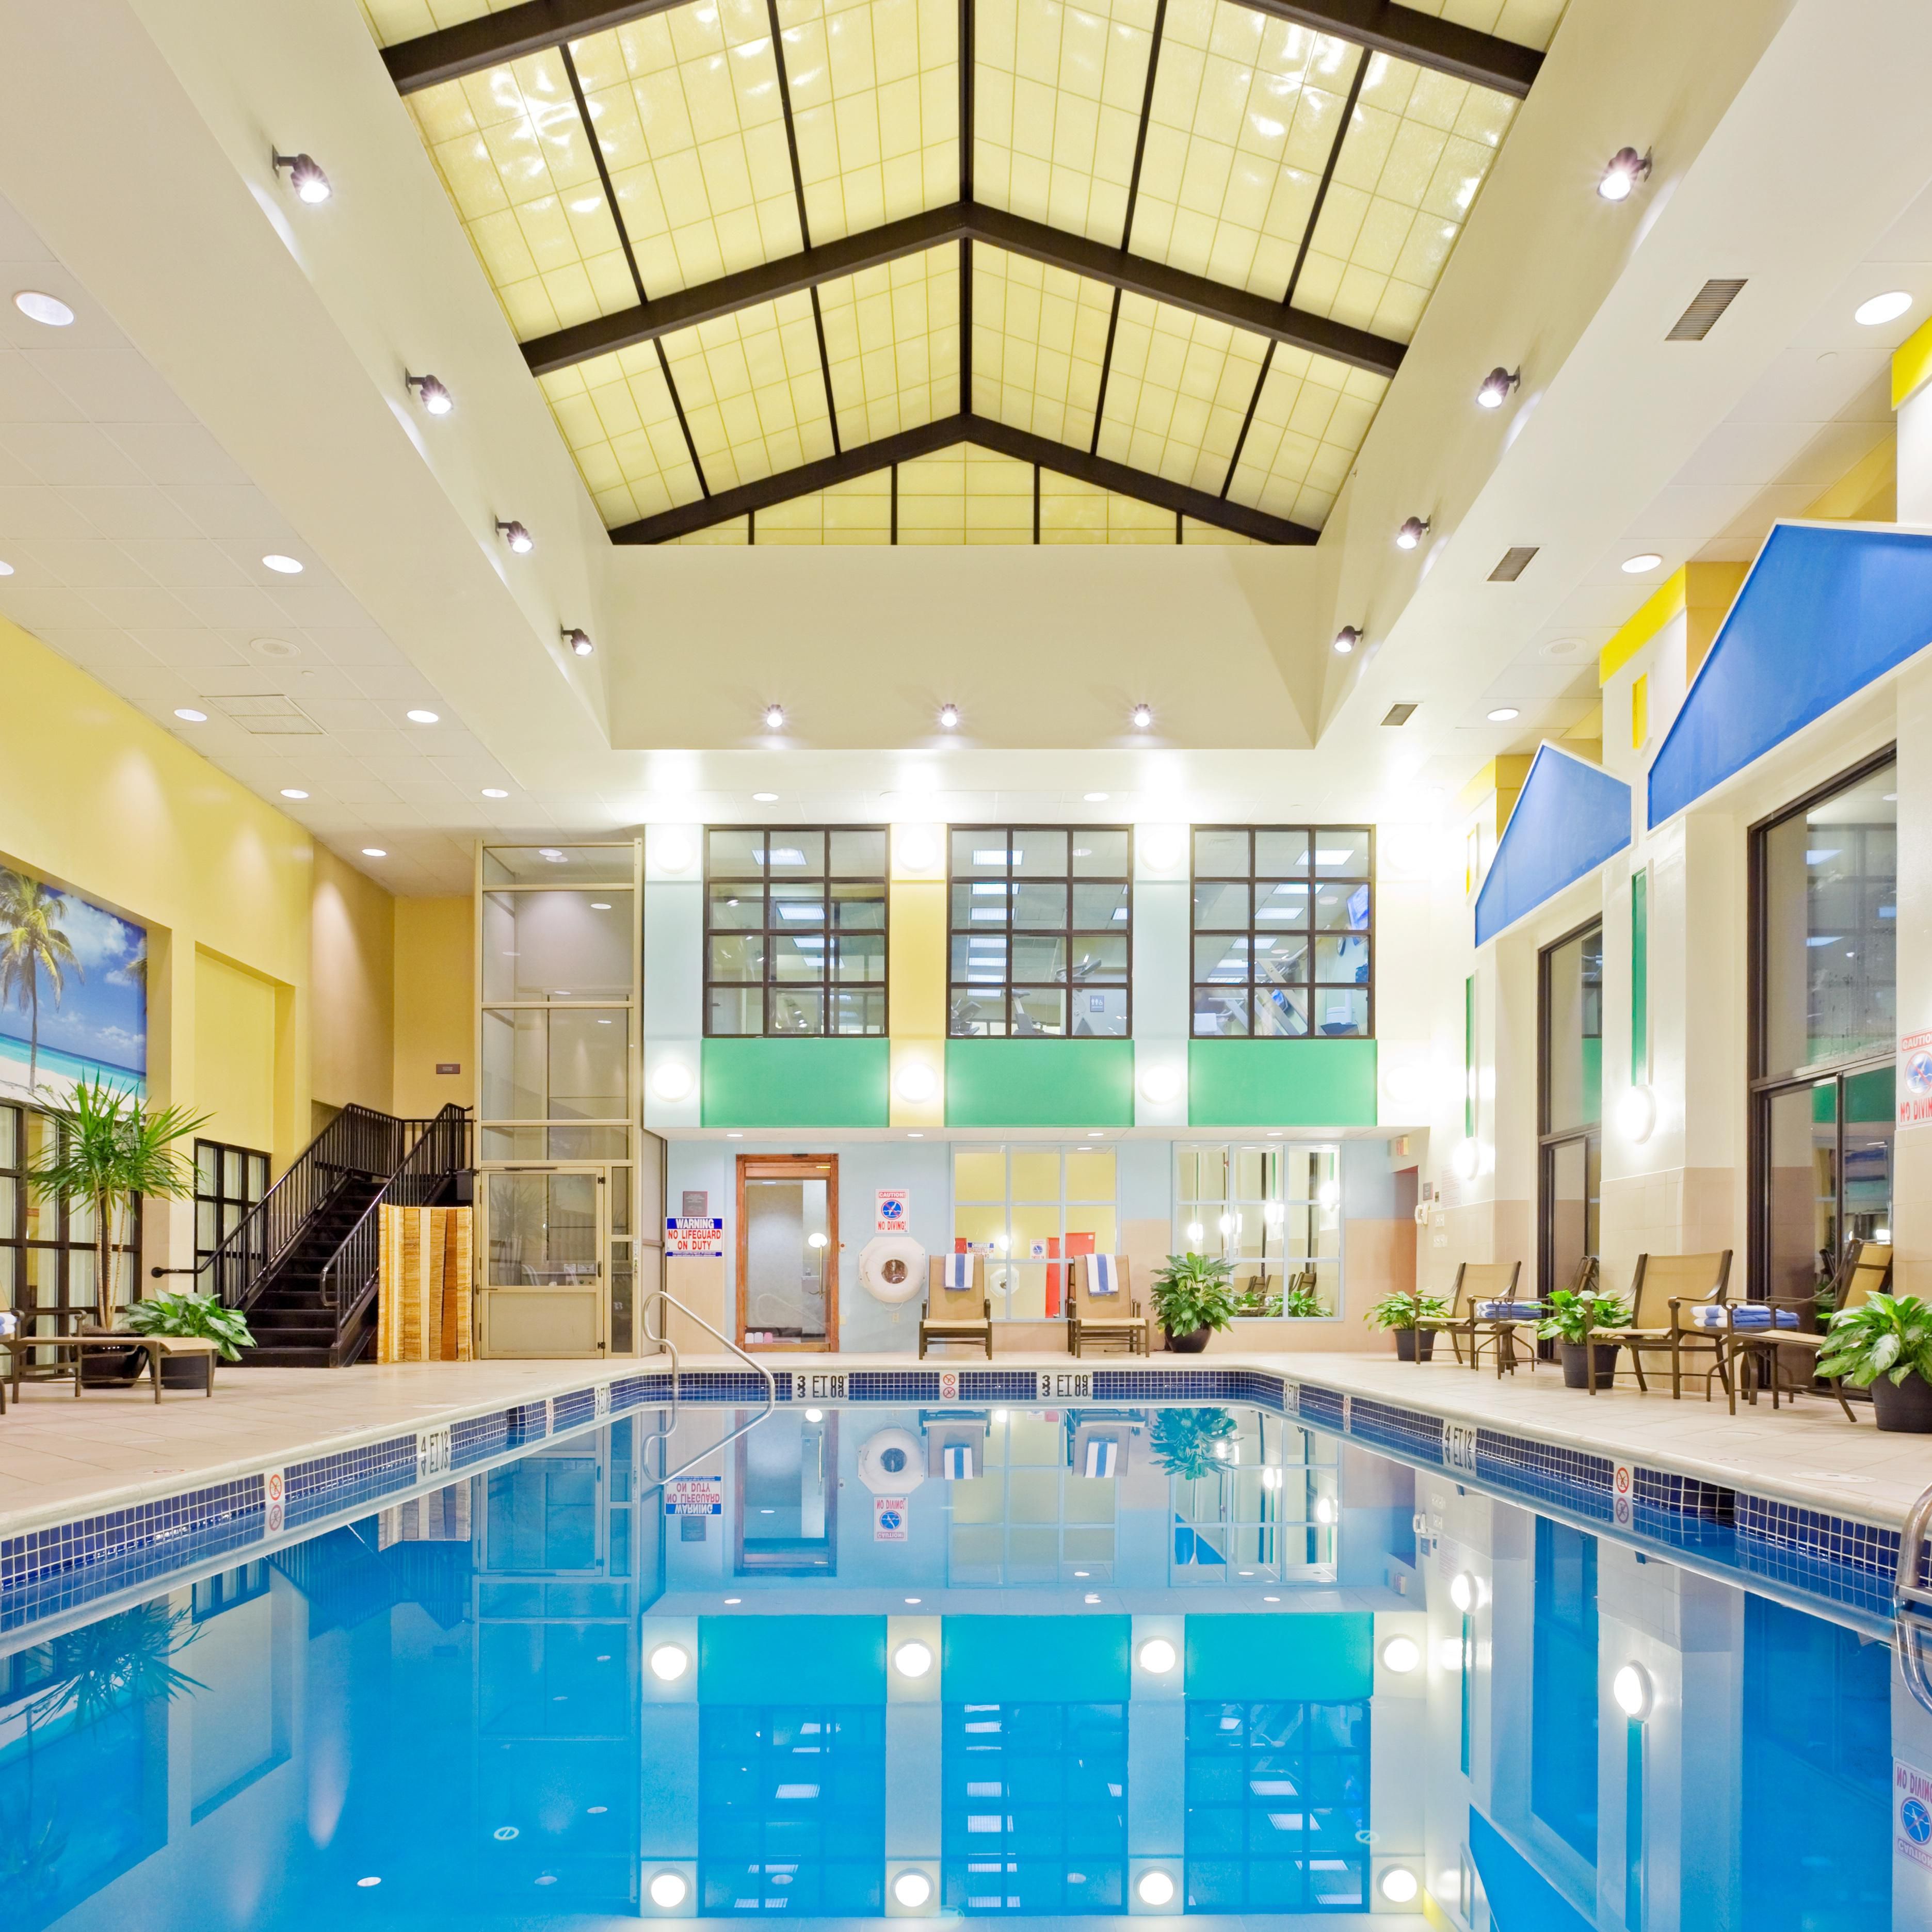 Take a refreshing dip in our indoor Swimming Pool